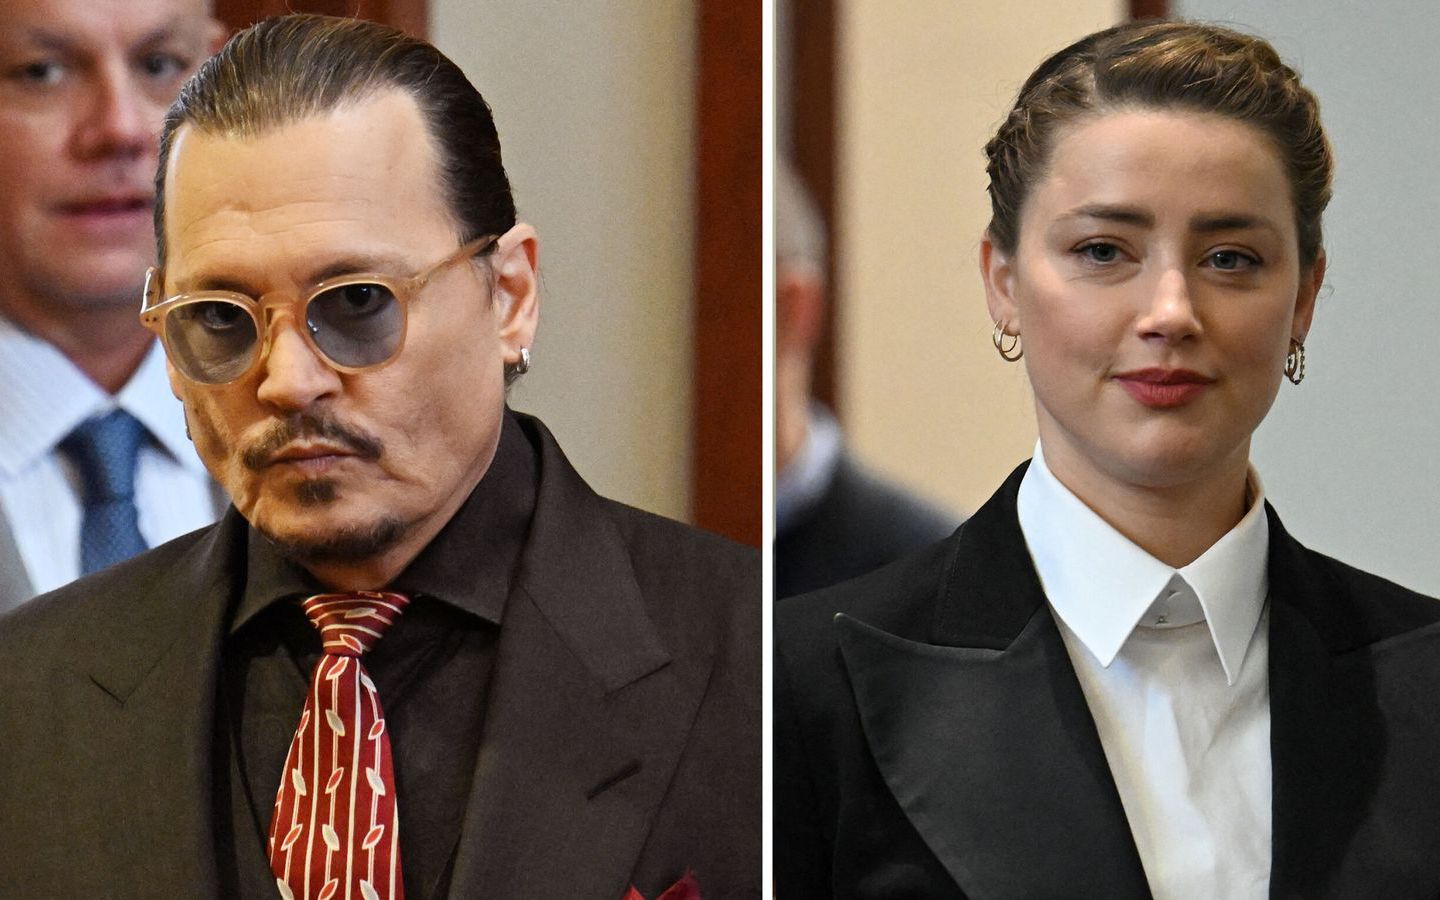 Witness “accused” Johnny Depp of controlling ex-wife’s clothes